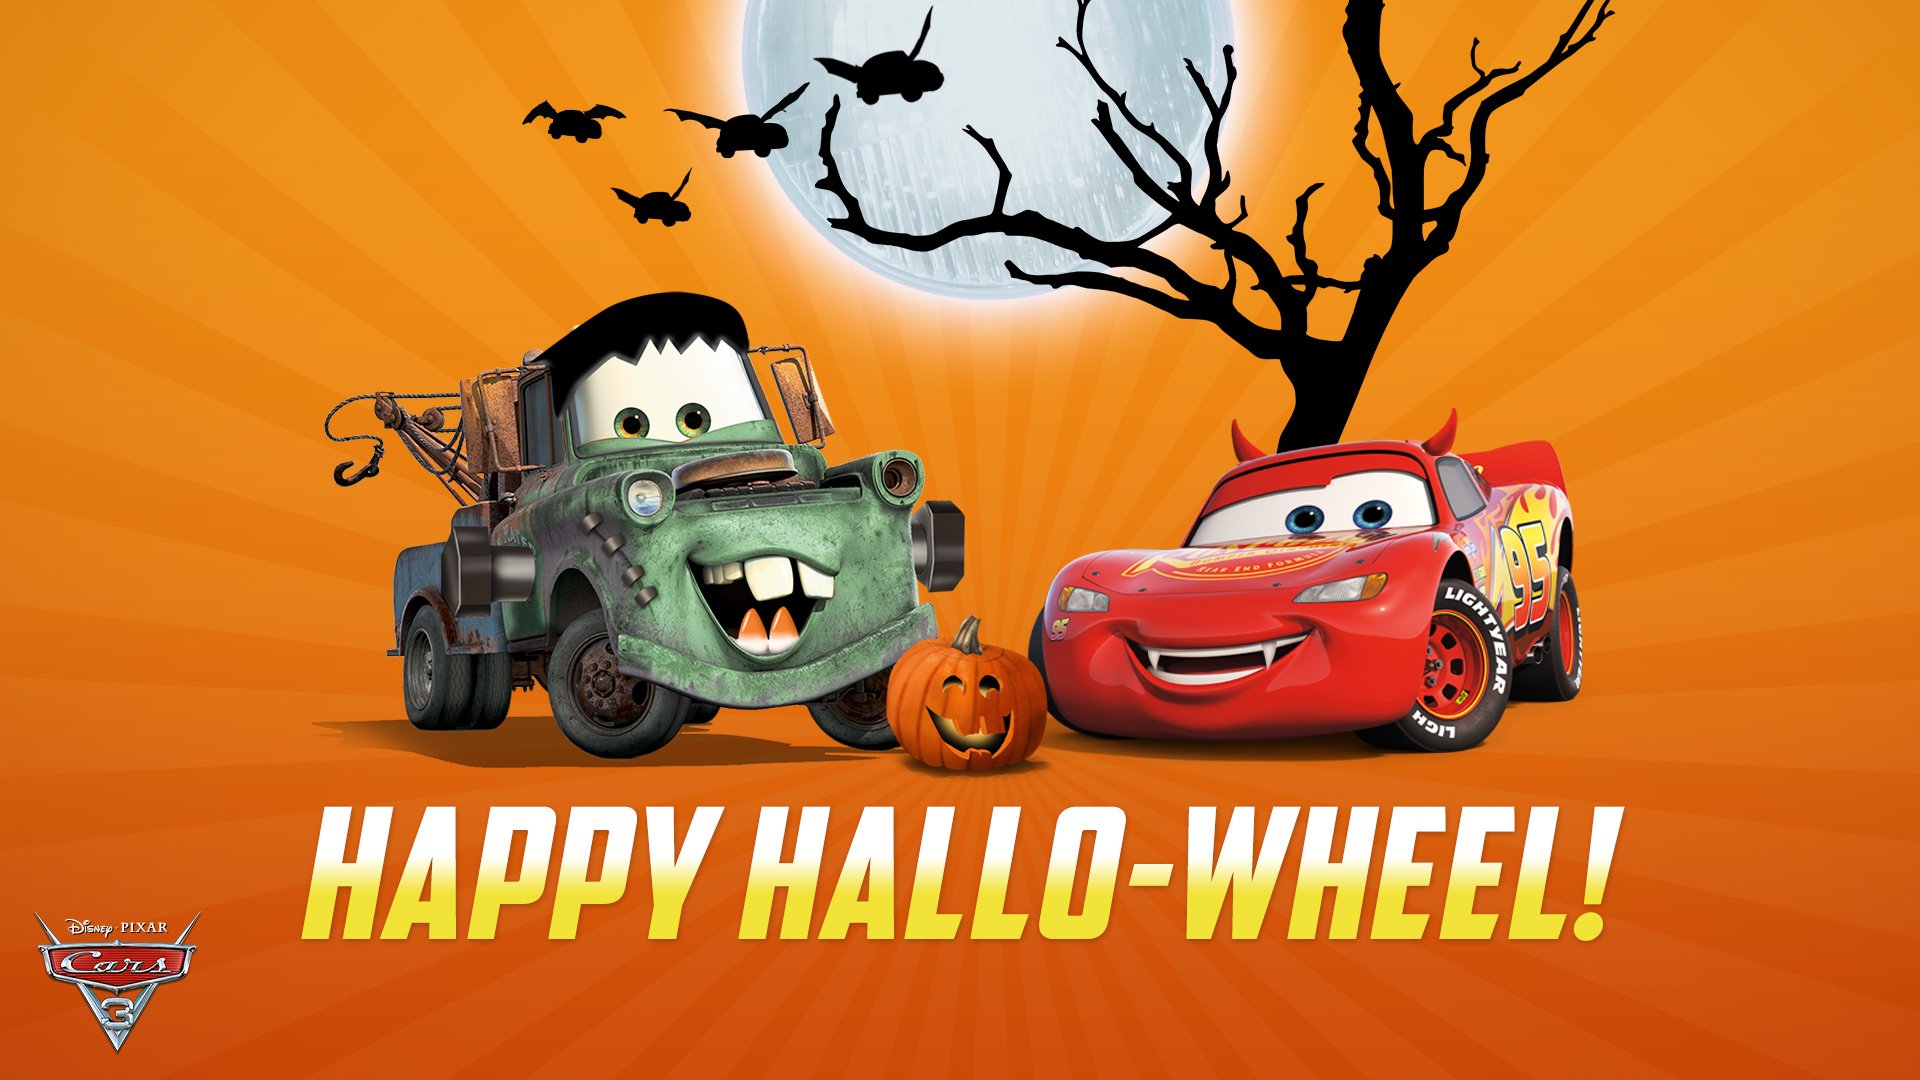 Disney•Pixar's Cars't forget to say “Trick or Beep!”